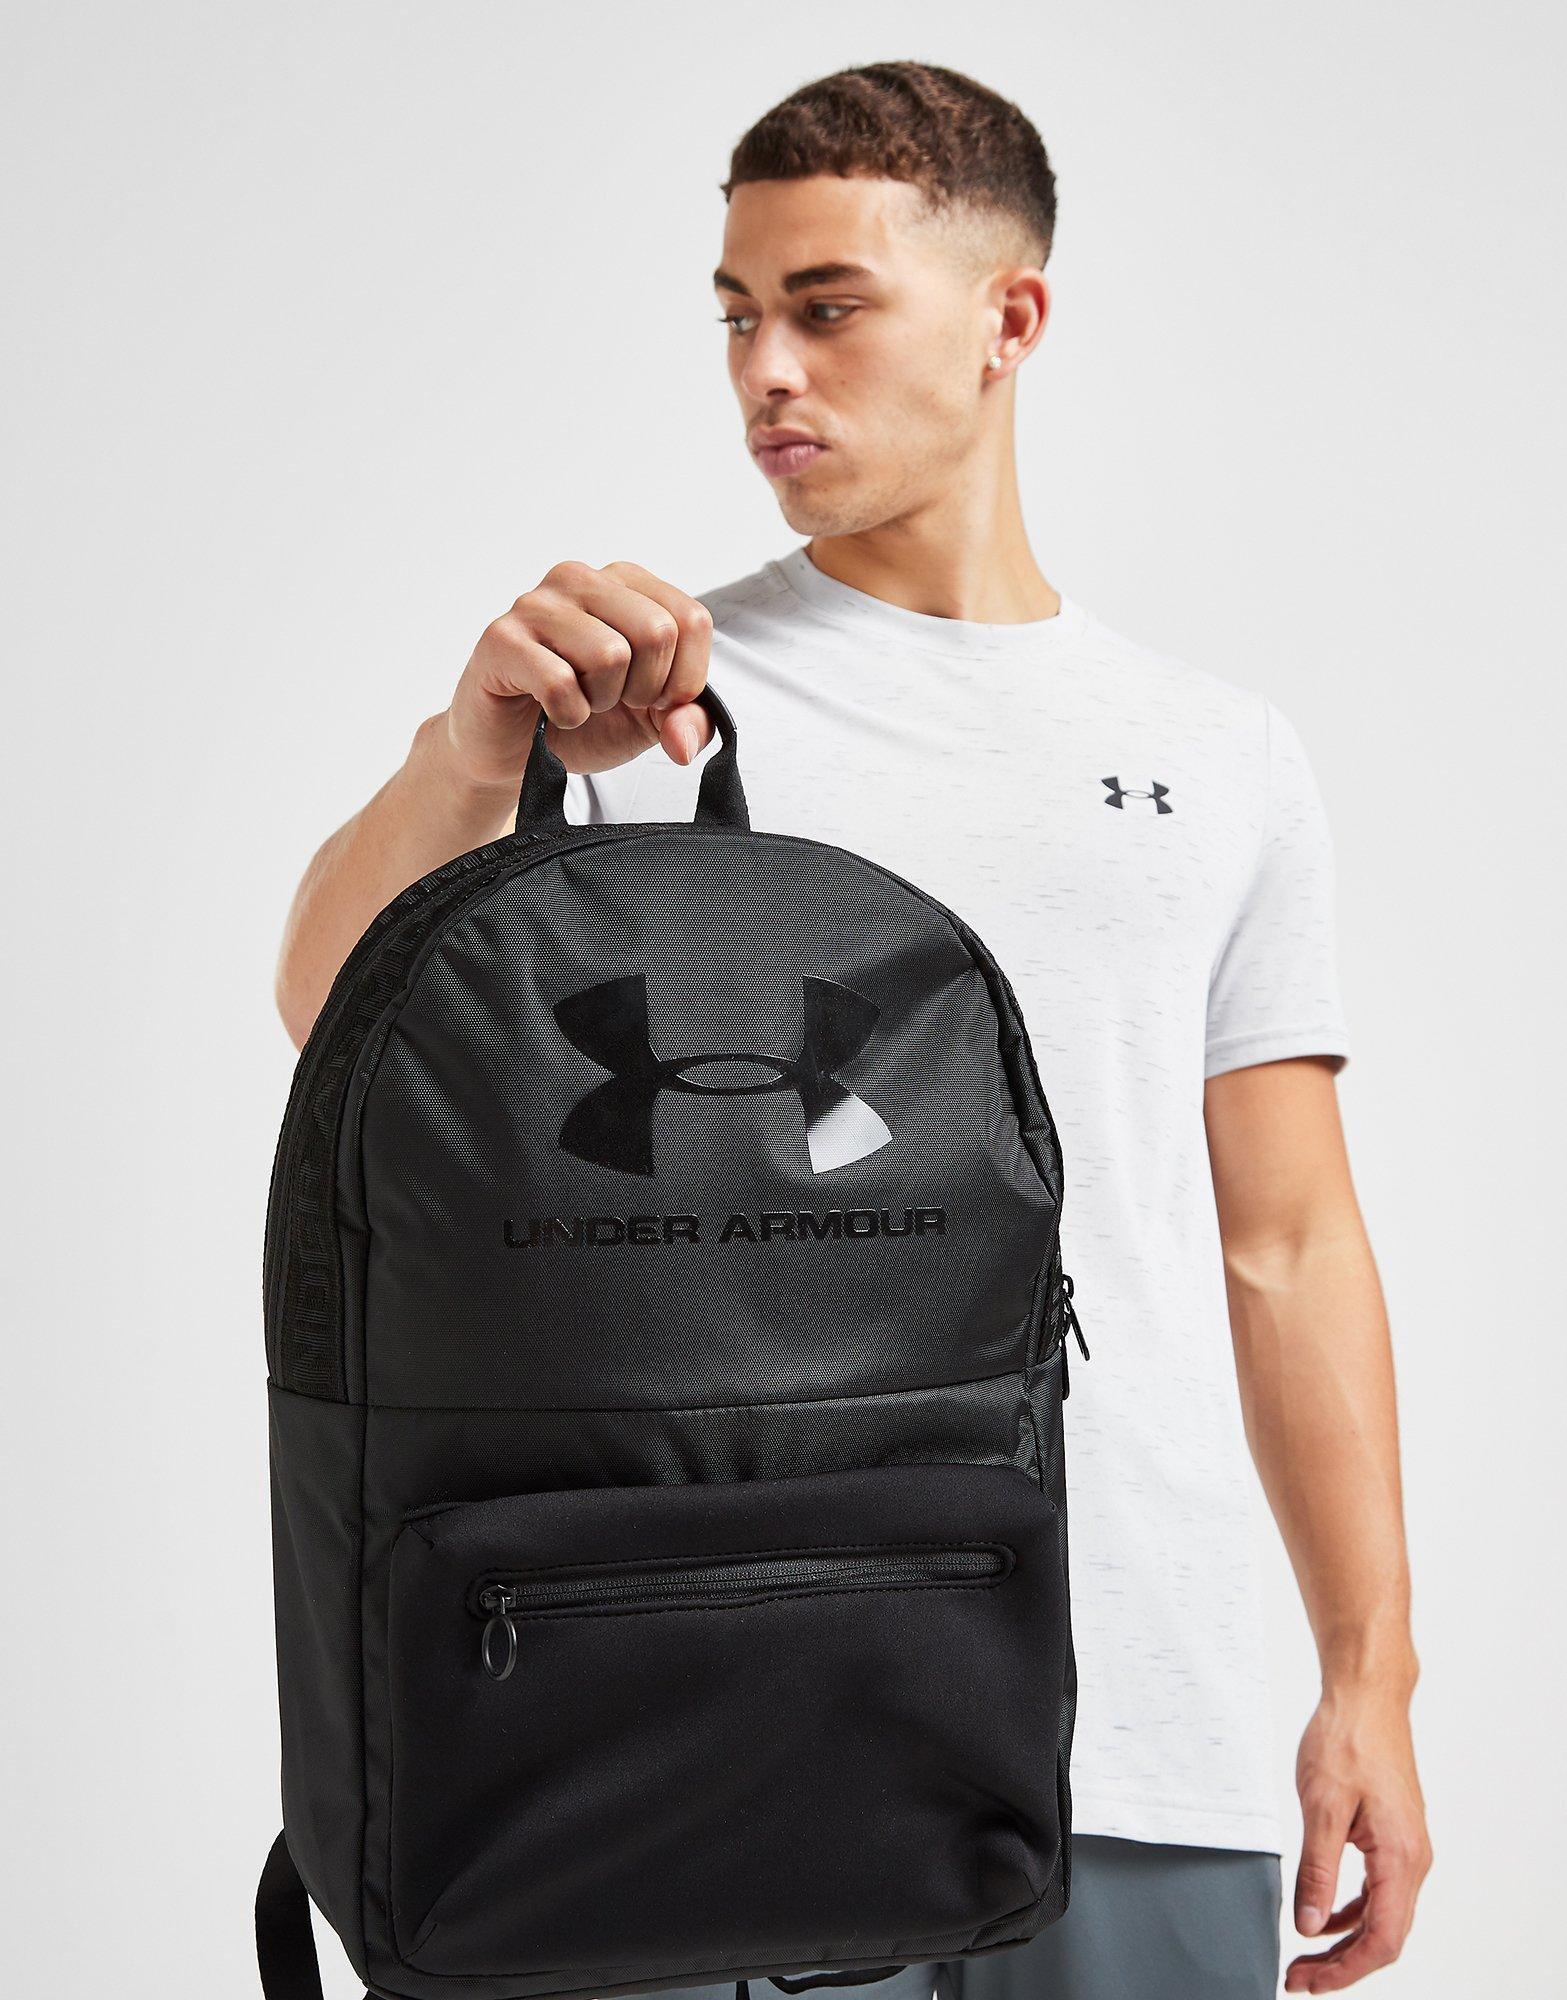 under armour rolling backpack